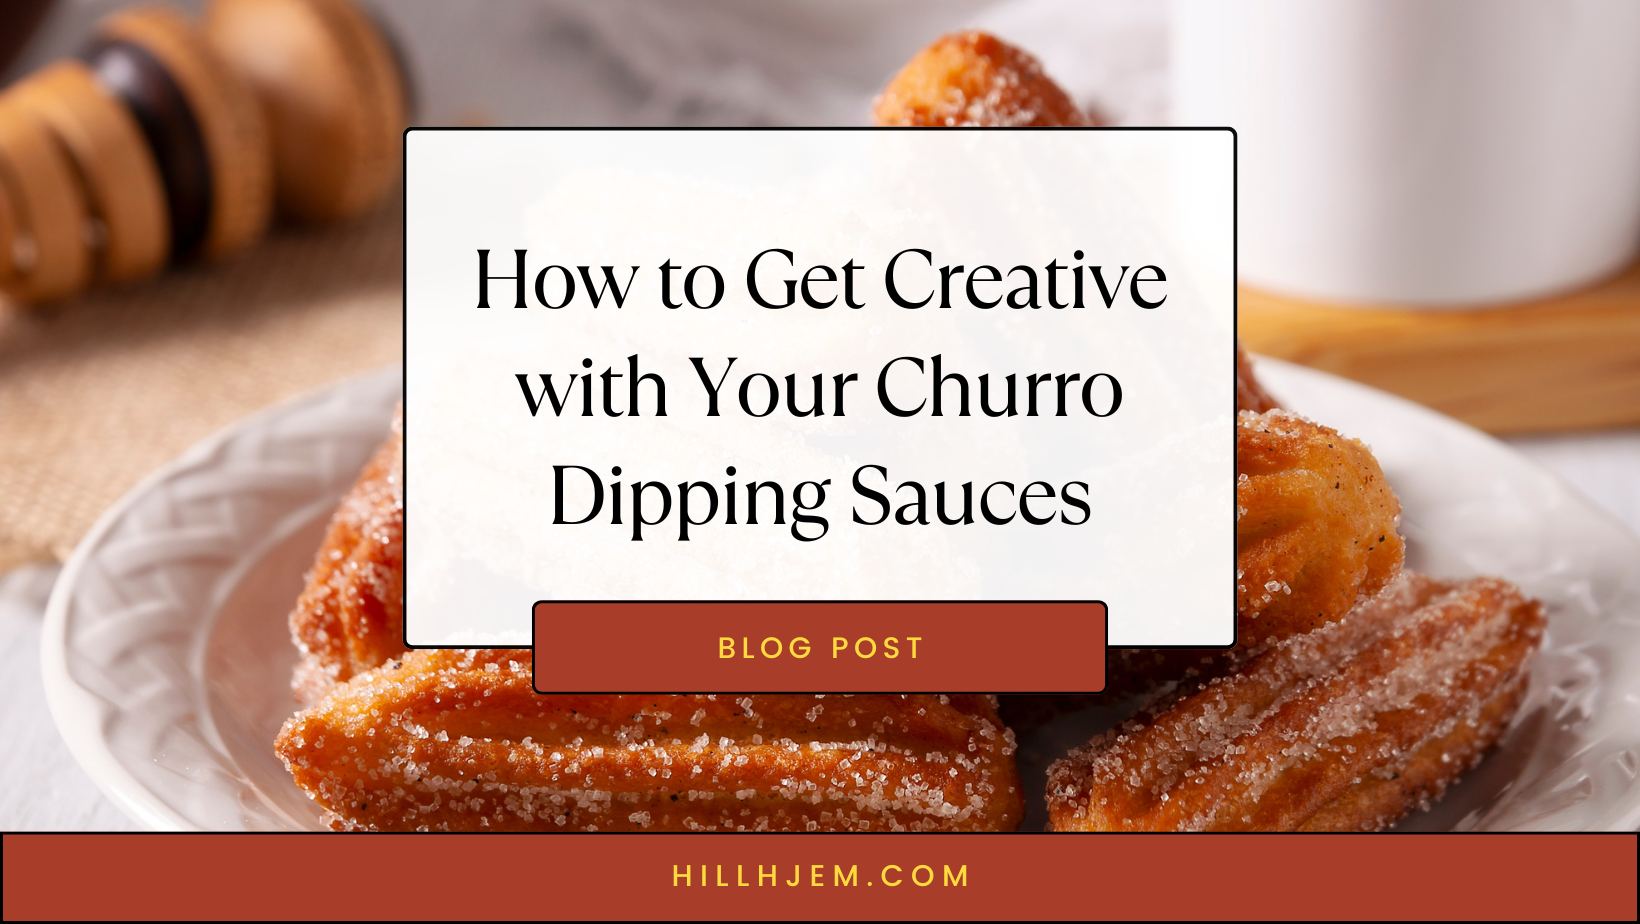 How to Get Creative with Your Churro Dipping Sauces